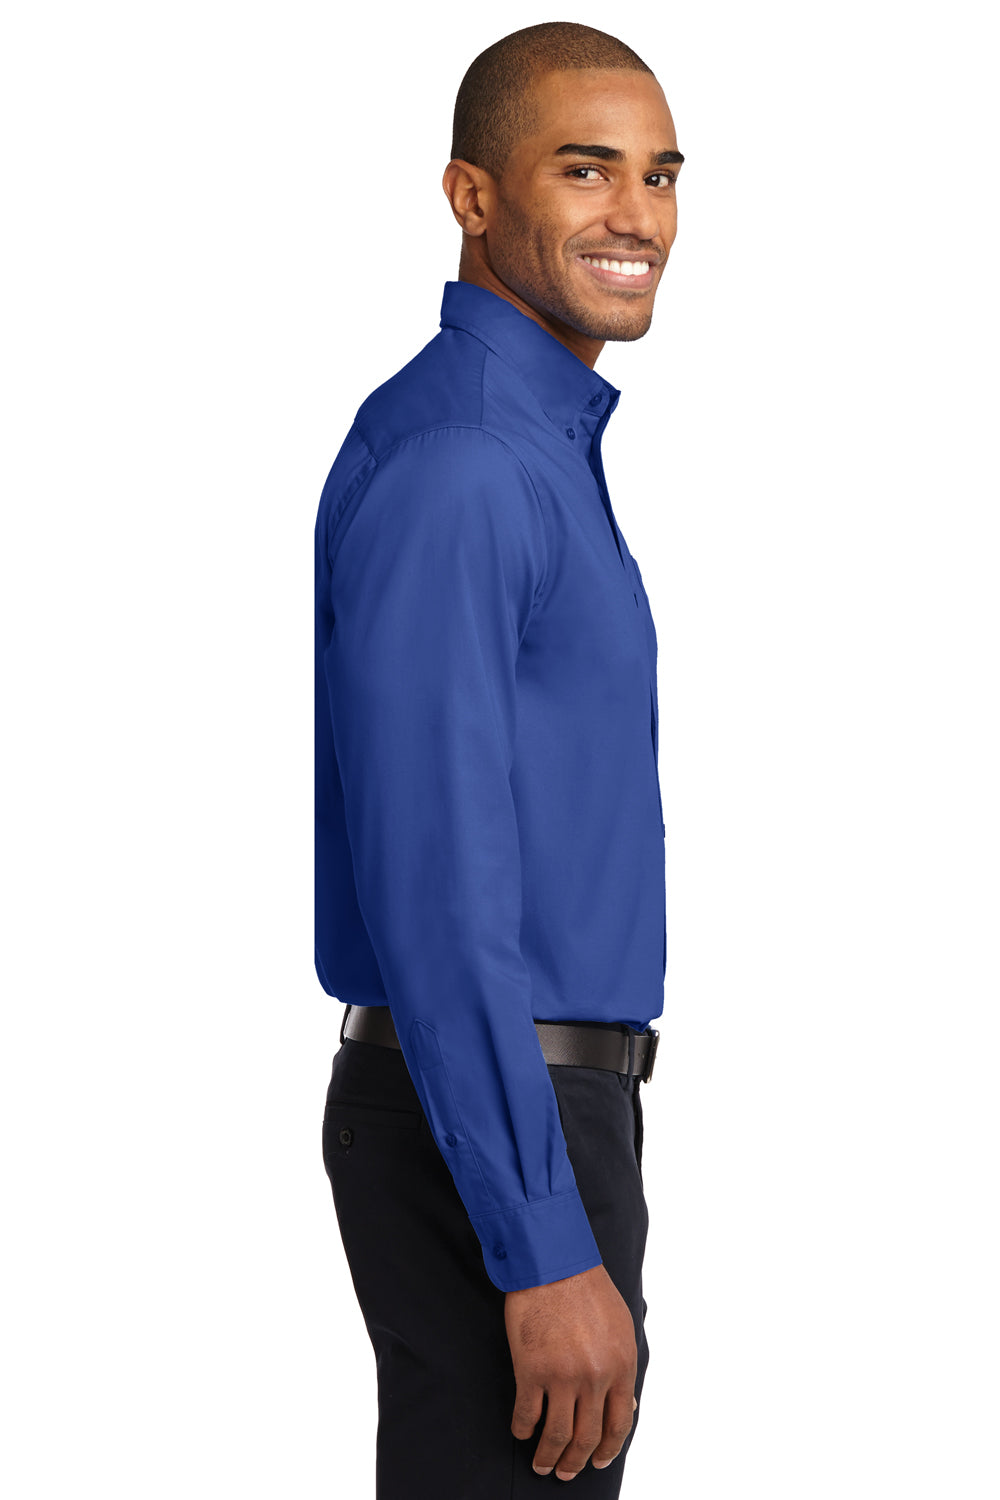 Port Authority S608/TLS608/S608ES Mens Easy Care Wrinkle Resistant Long Sleeve Button Down Shirt w/ Pocket Royal Blue Side